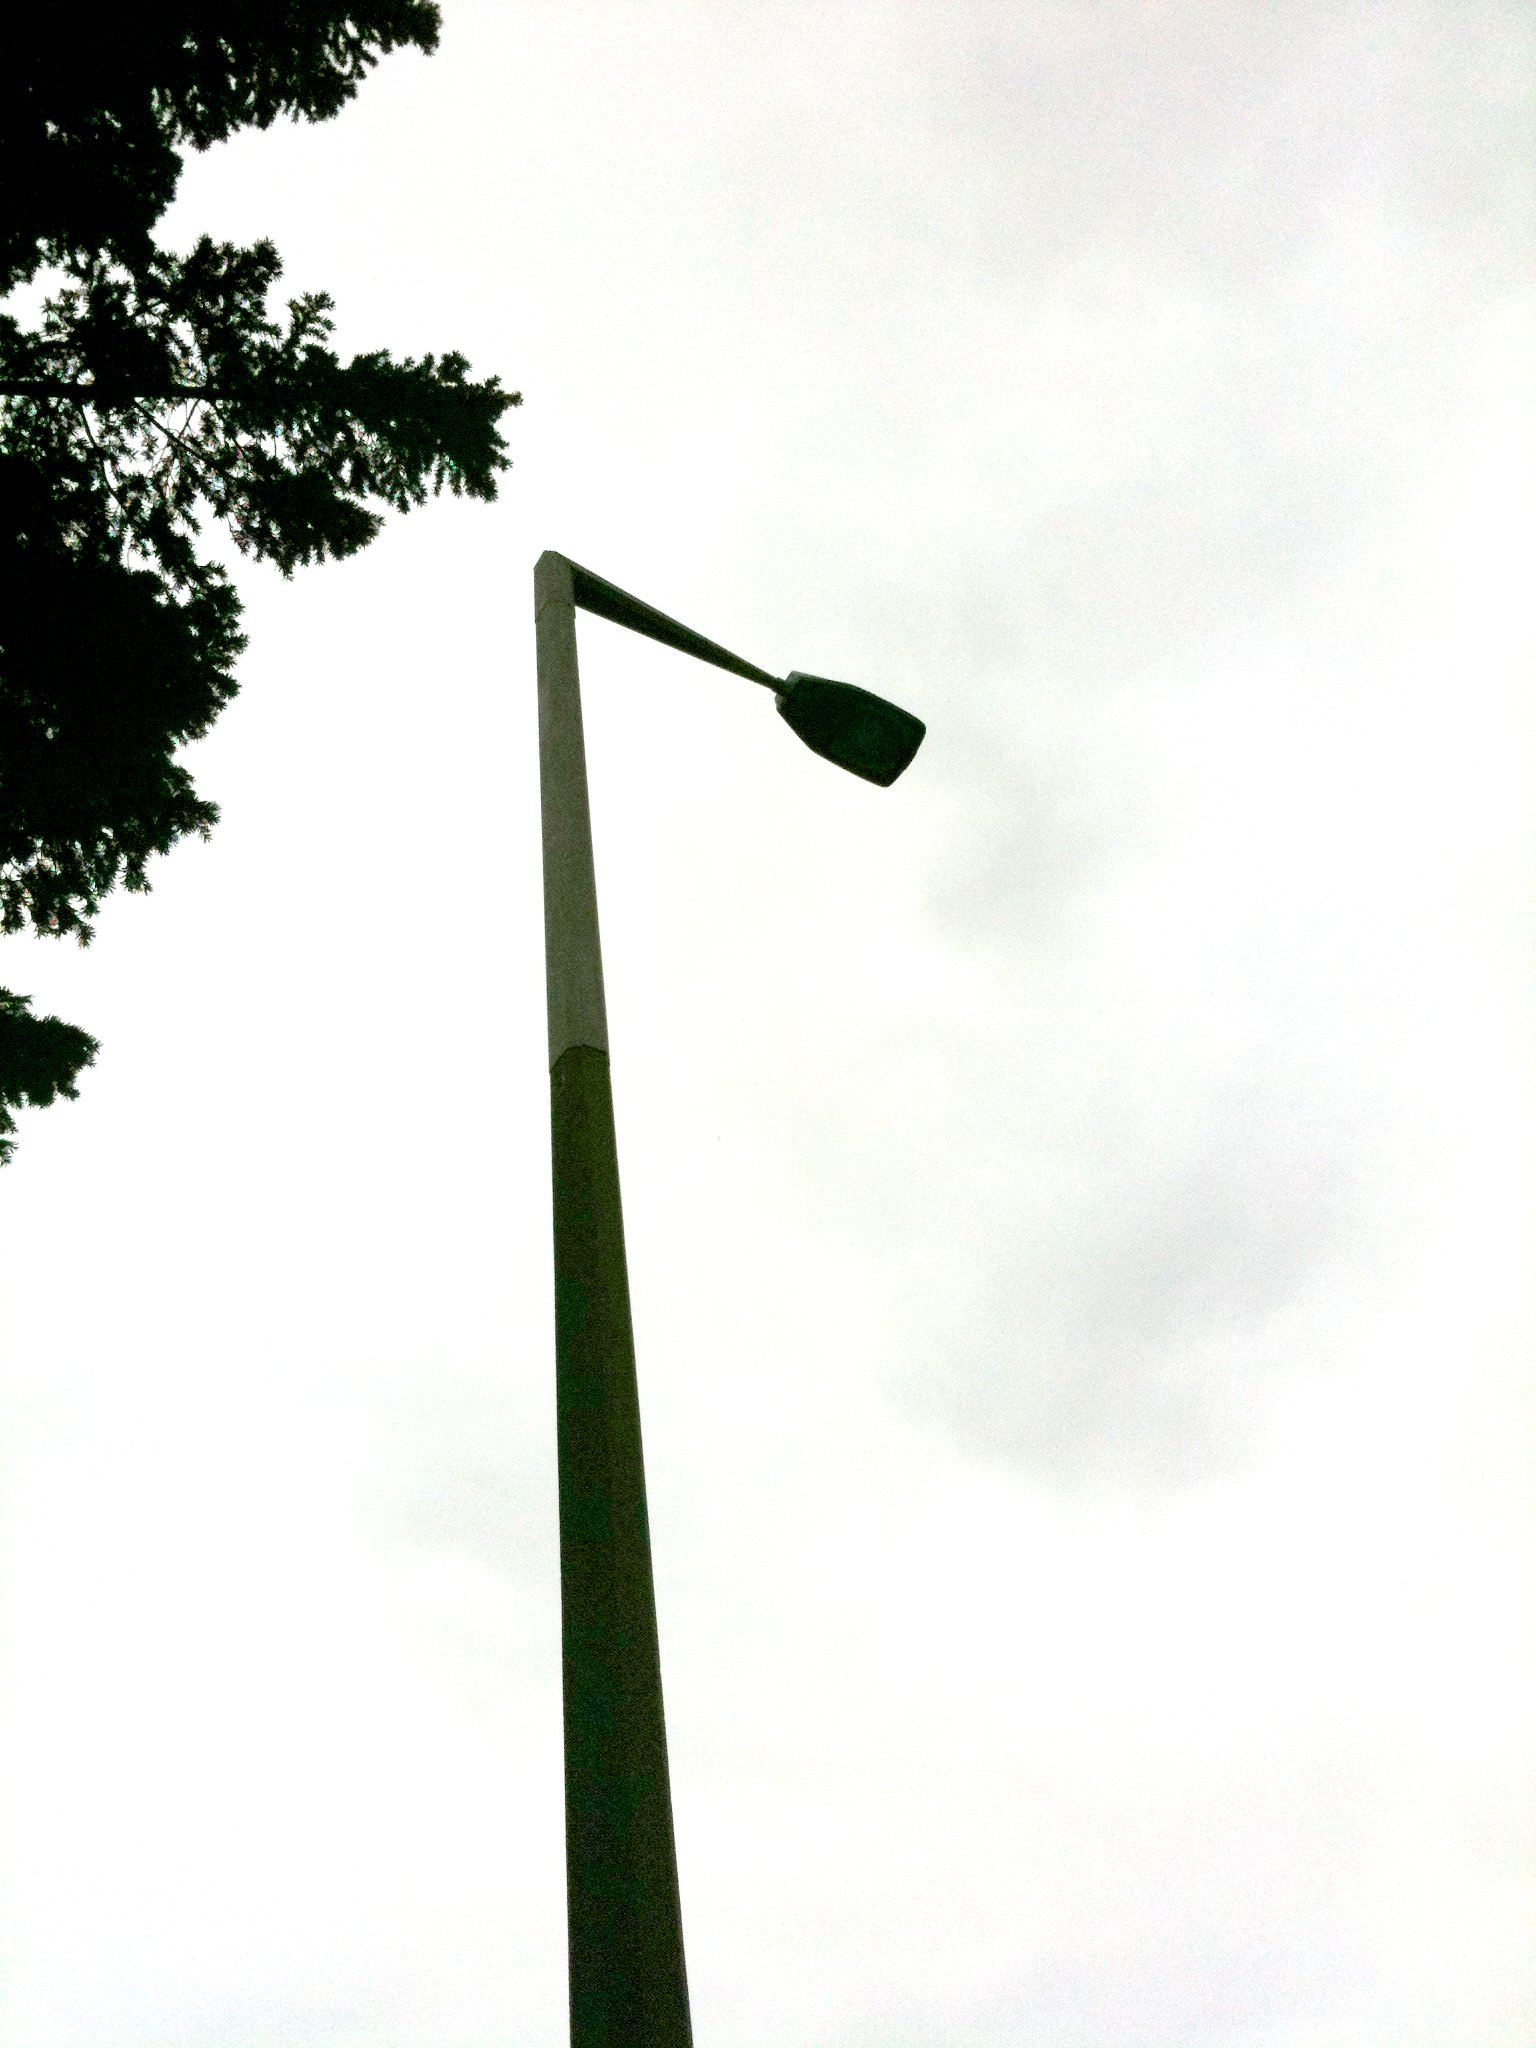 a street lamp, street light and tree in silhouette